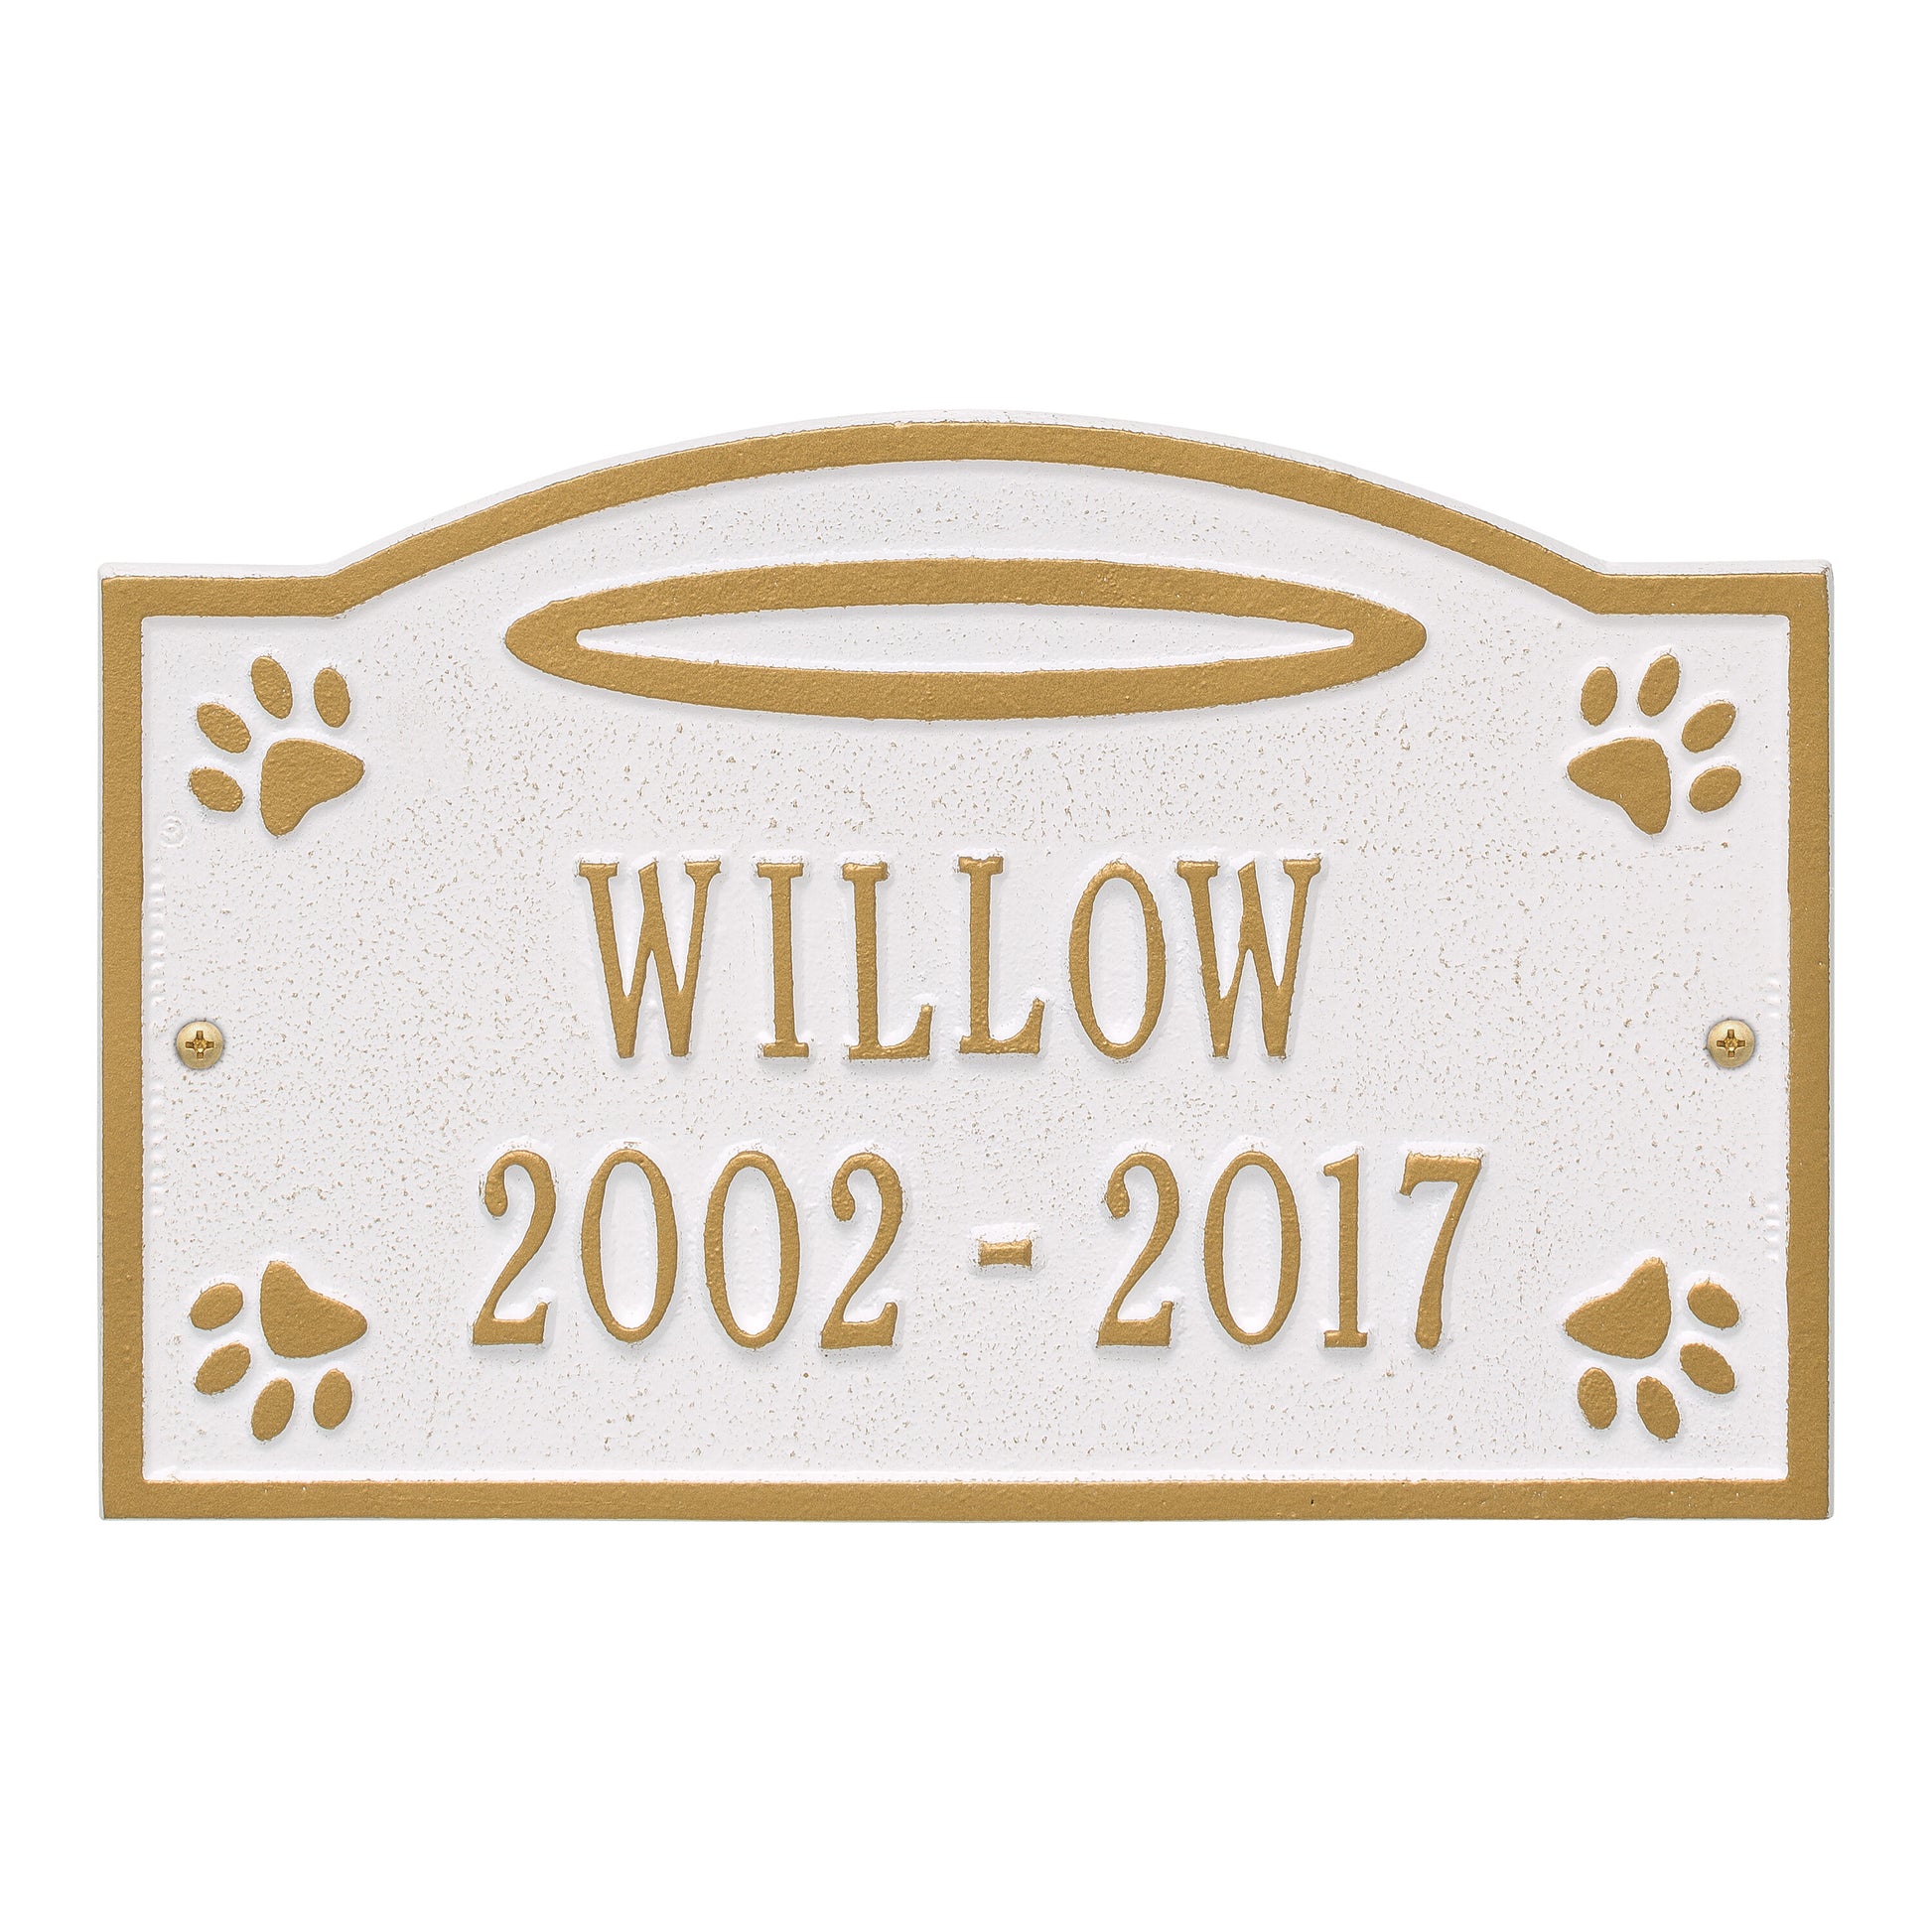 Whitehall Products Angel In Heaven Pet Memorial Personalized Wall Or Ground Plaque Two Lines 